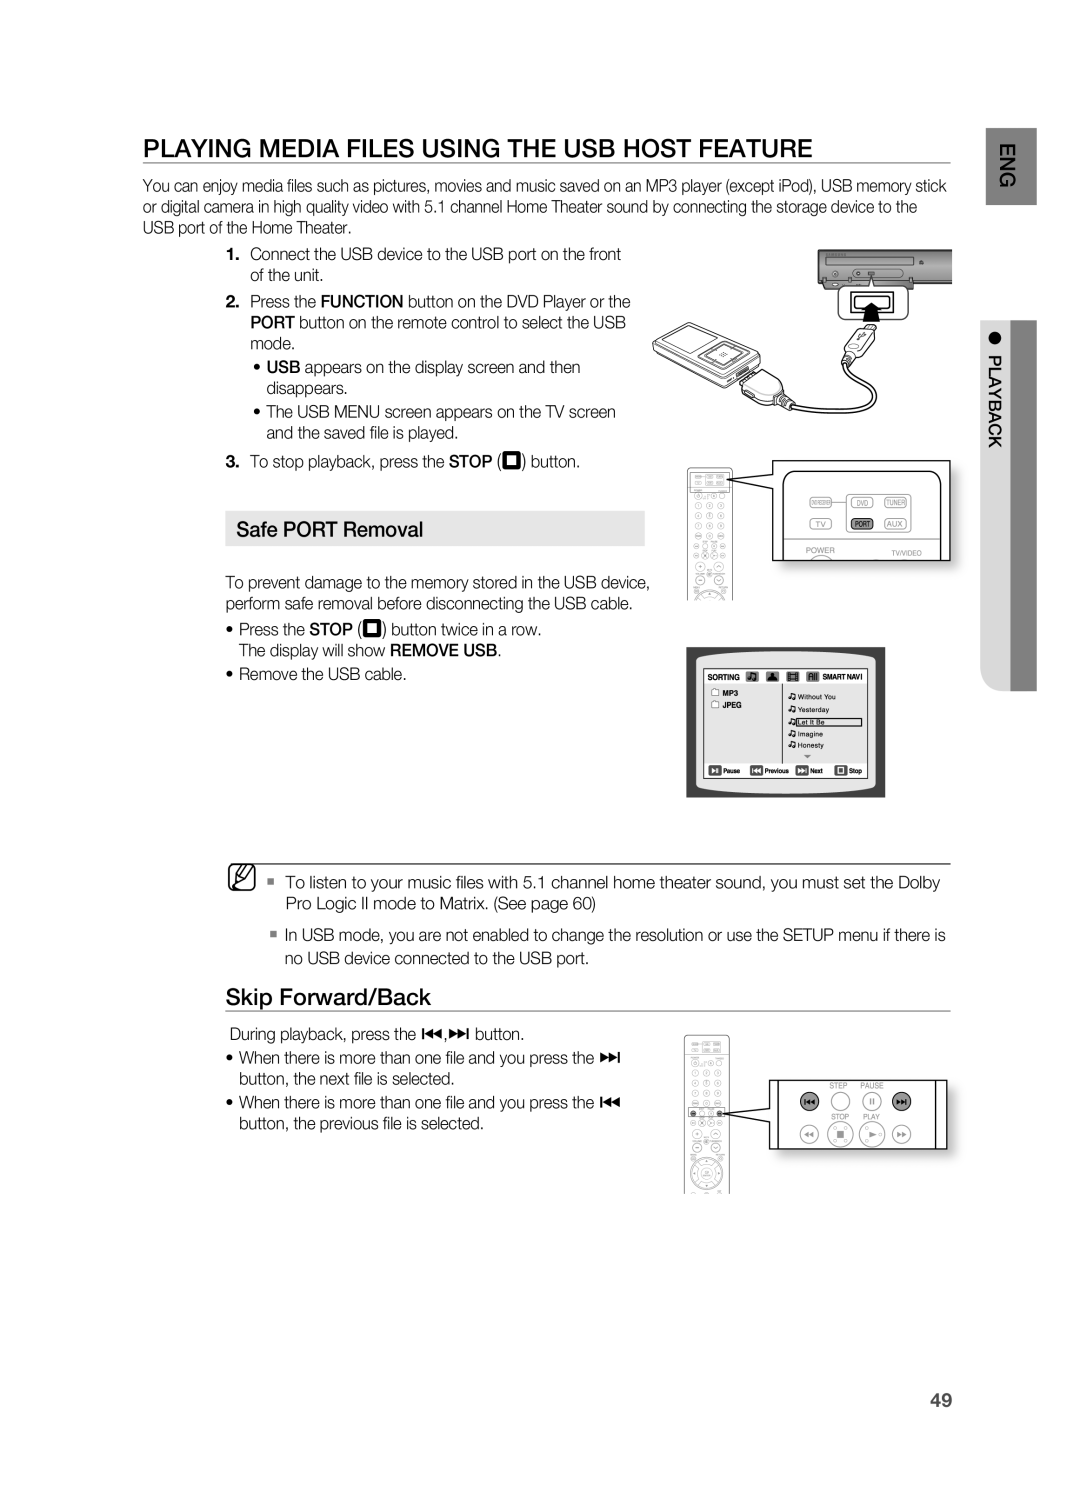 Samsung HT-TZ312 manual PLayinG mEDia fiLES USinG tHE USB HOSt fEatUrE, Safe POrt removal, Skip forward/Back 